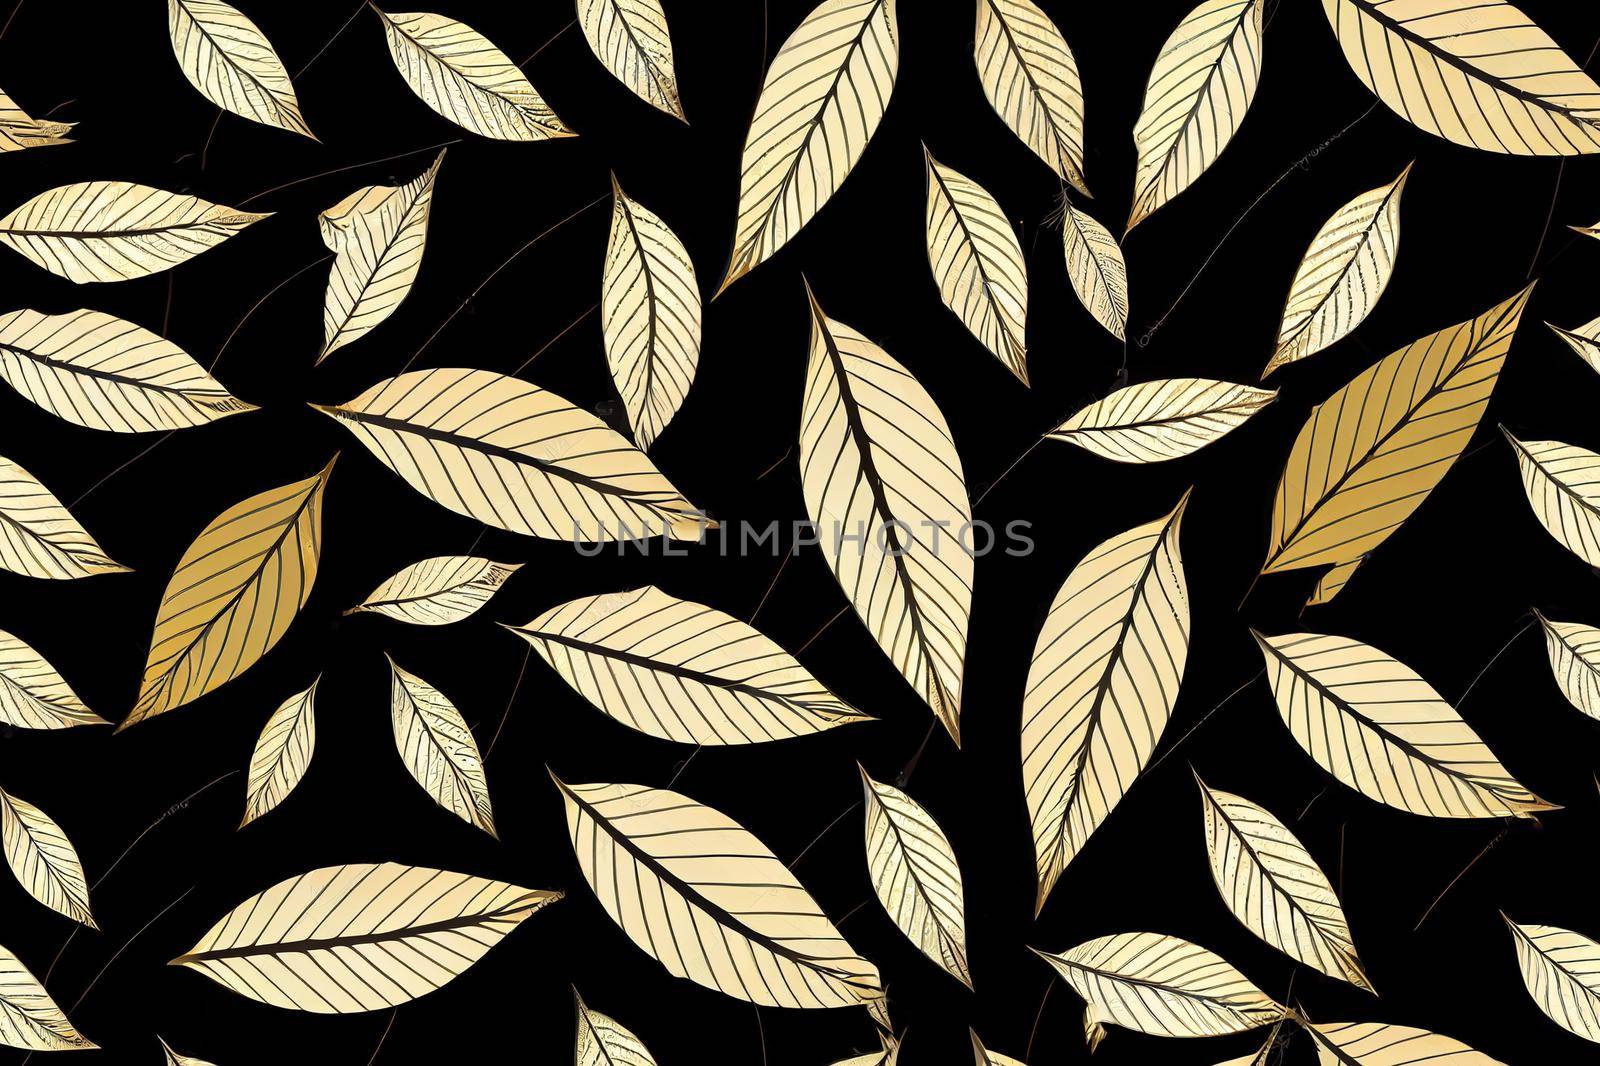 Floral seamless pattern with black and gold leaves. Decorative background.